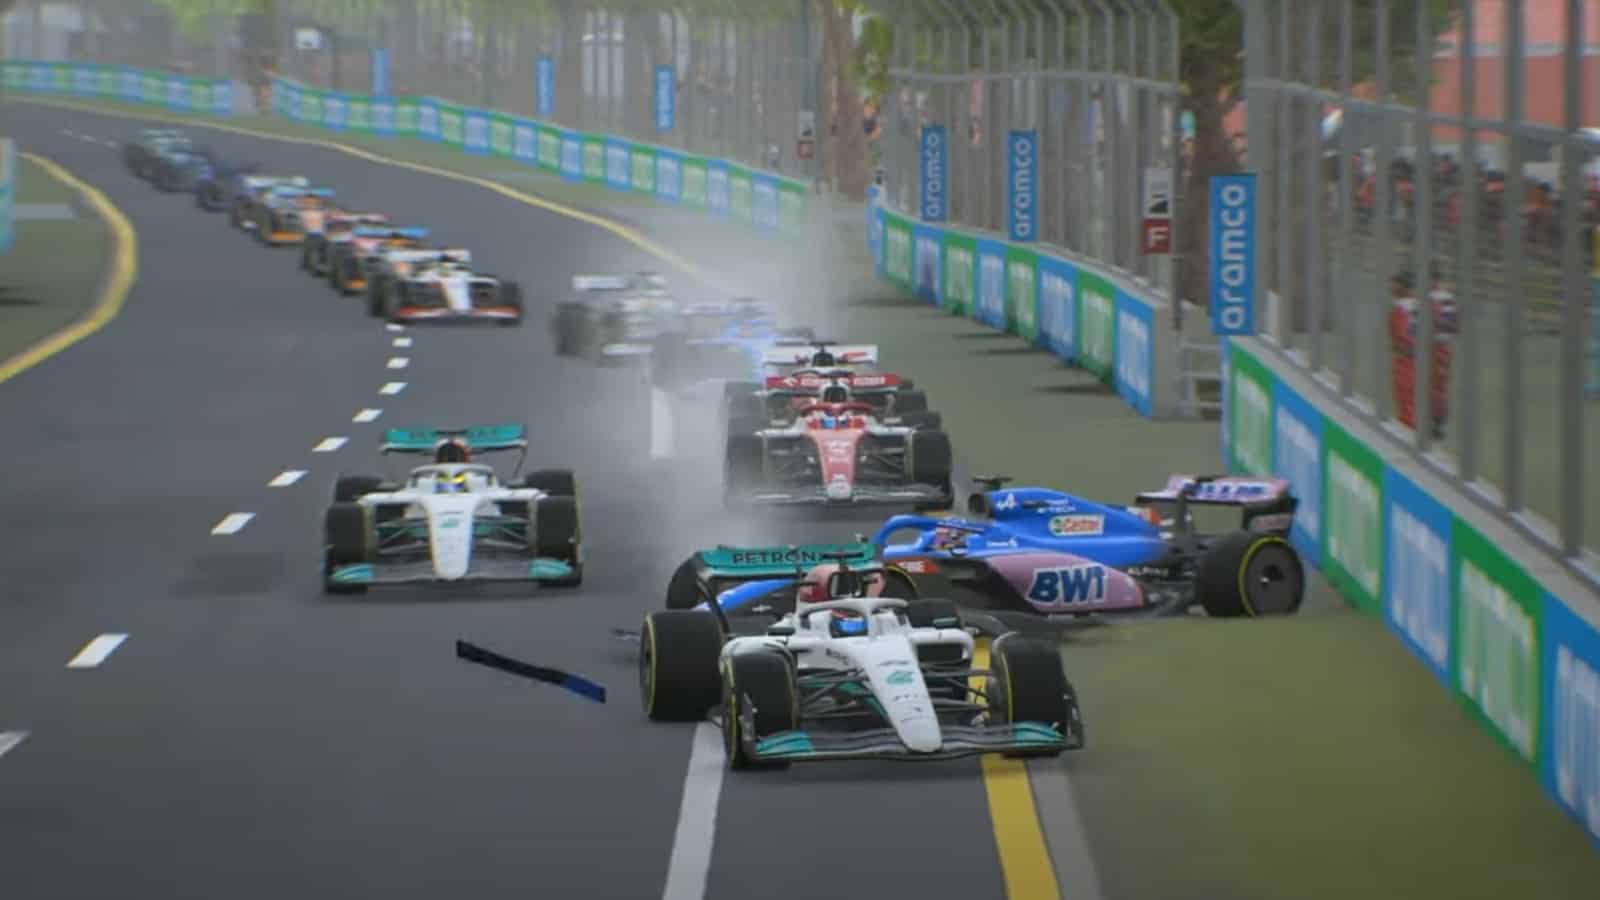 A wreck in F1 Manager 2022